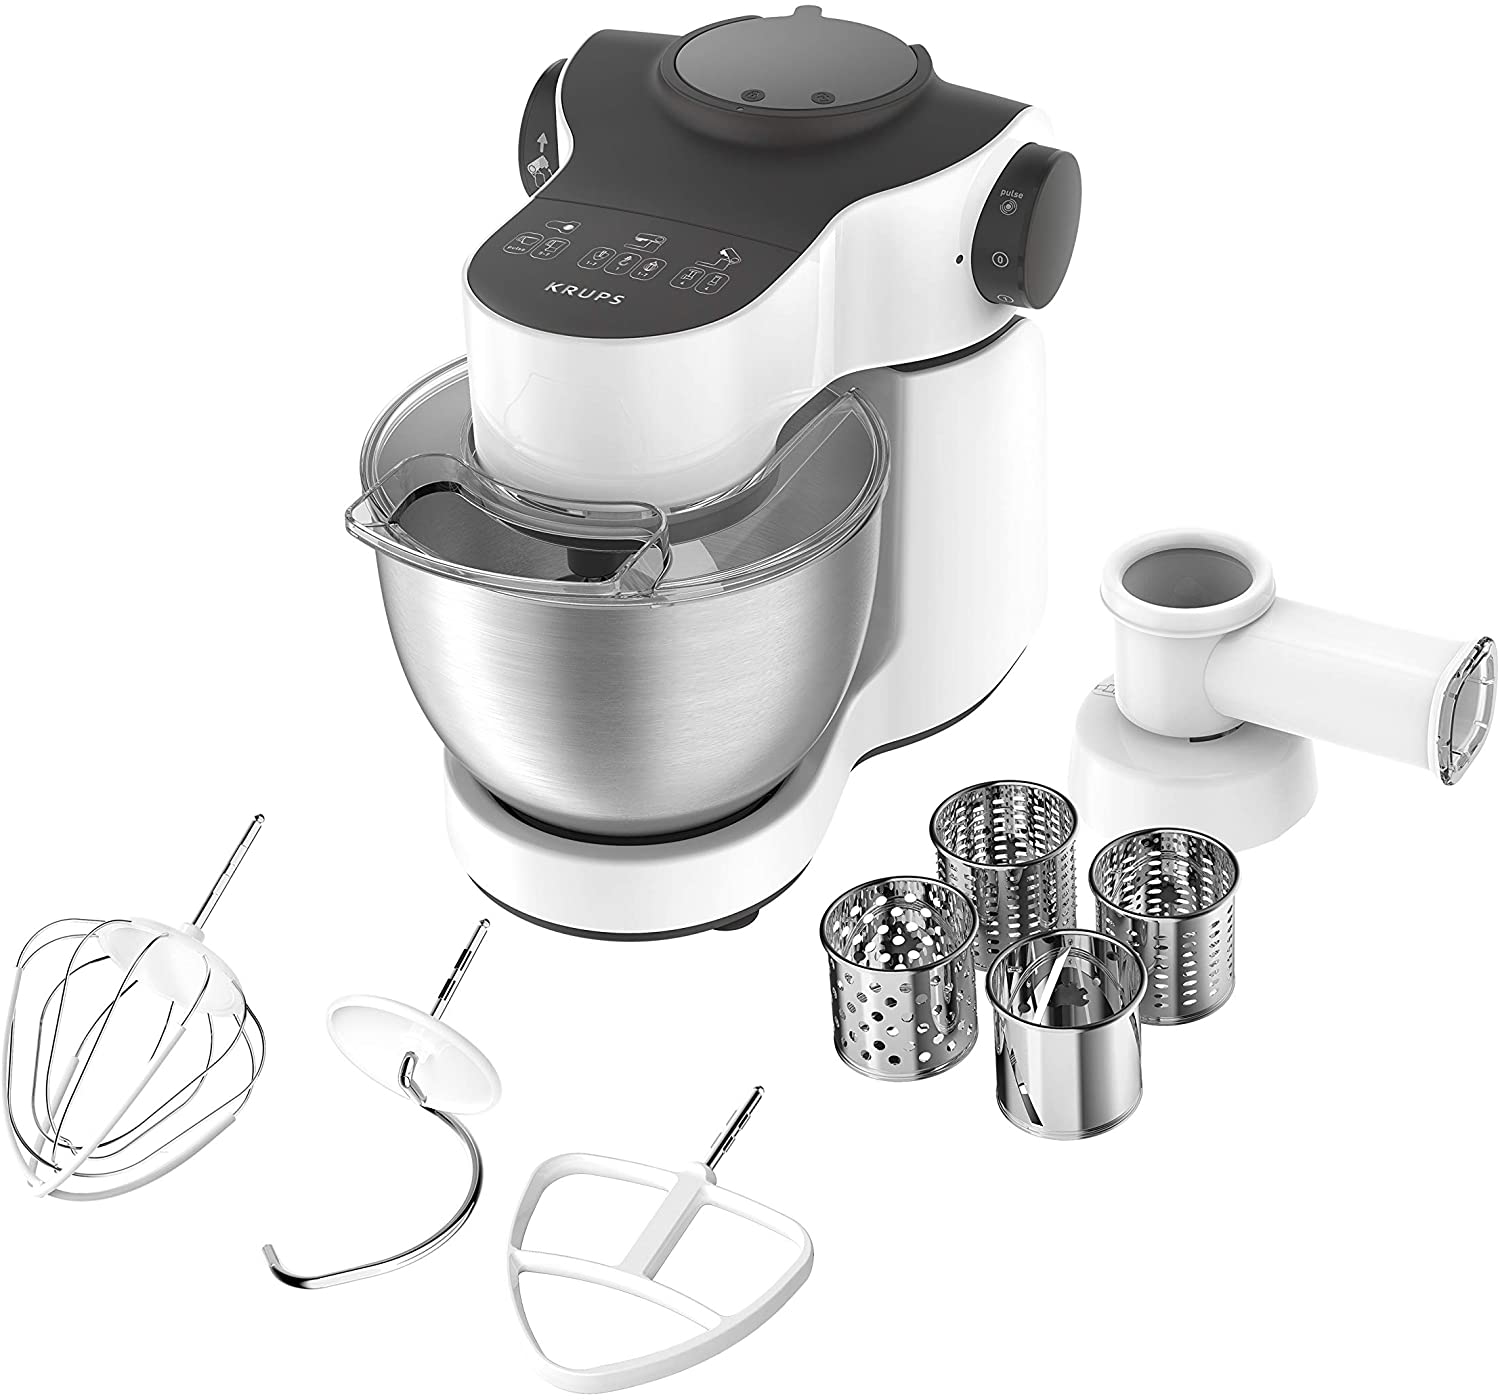 Krups Master Perfect Food Processor, White